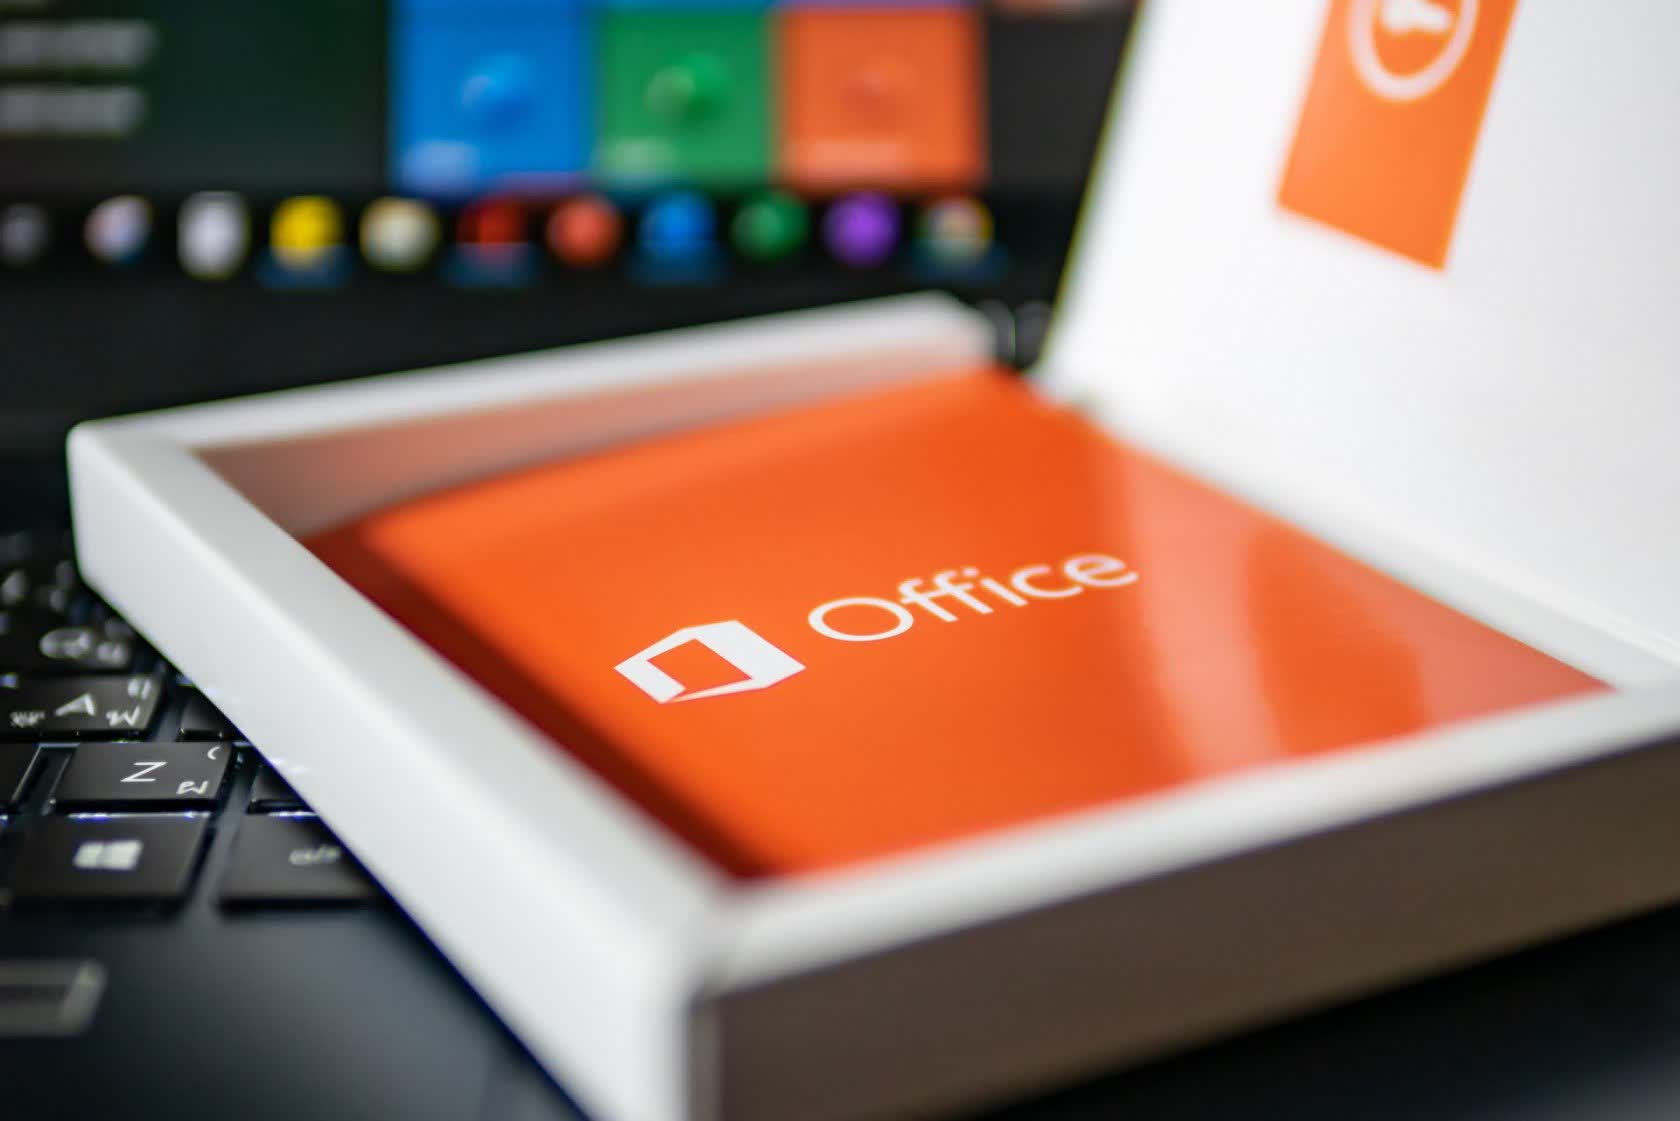 Microsoft announces perpetually-licensed Office 2021 for Windows and macOS